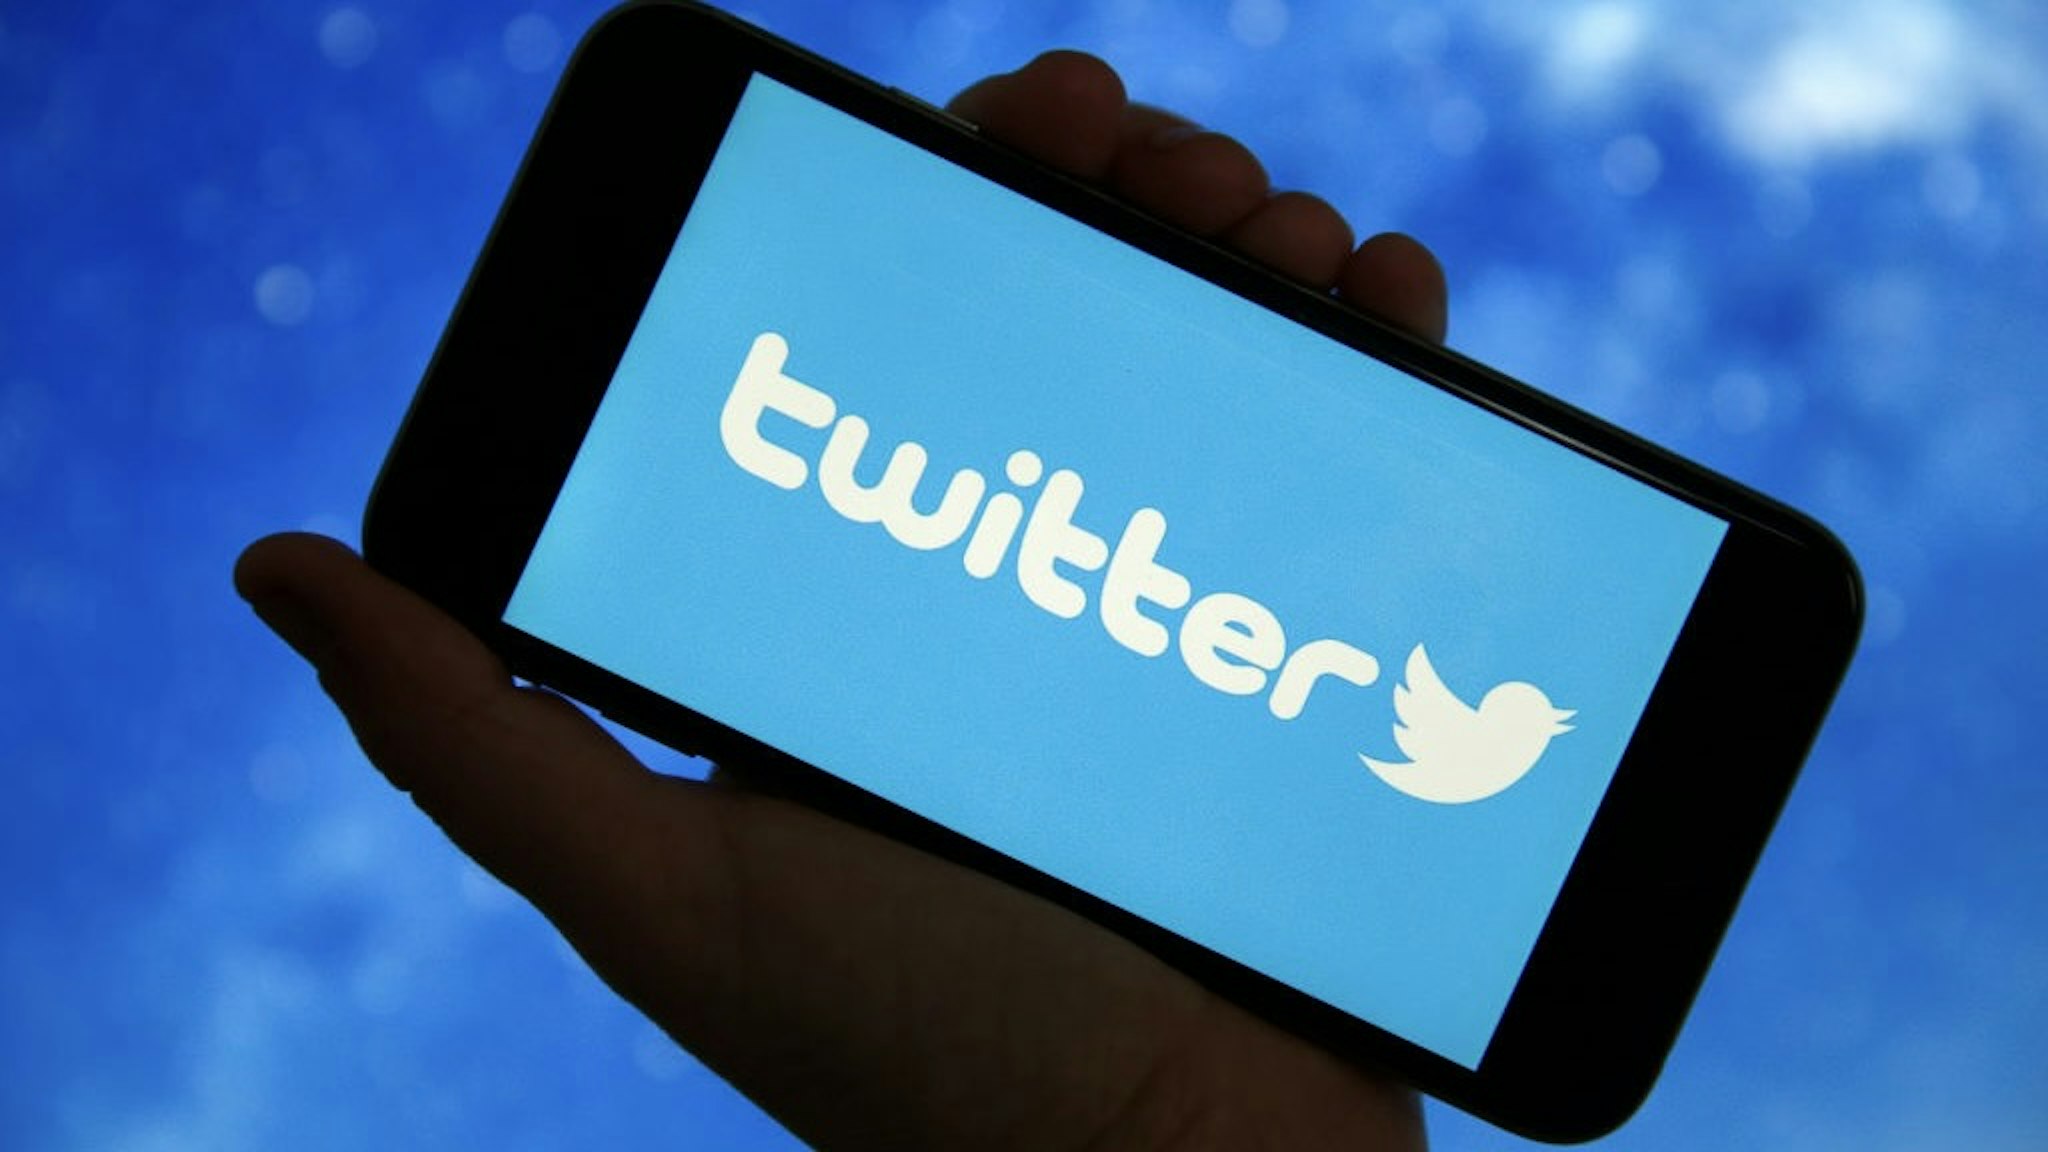 PARIS, FRANCE - DECEMBER 26: In this photo illustration, the microblogging social network Twitter logo is displayed on the screen of a smartphone on December 26, 2019 in Paris, France. A cybersecurity specialist has successfully downloaded lists of phone numbers using the contact upload feature on Twitter. No less than 2 billion telephone numbers have been recovered. The hacker then linked the numbers to user accounts, ultimately obtaining 17 million matches. For two months, his efforts allowed him to obtain information on people in Israel, Turkey, Iran, Greece, Armenia, France and Germany. (Photo by Chesnot/Getty Images)